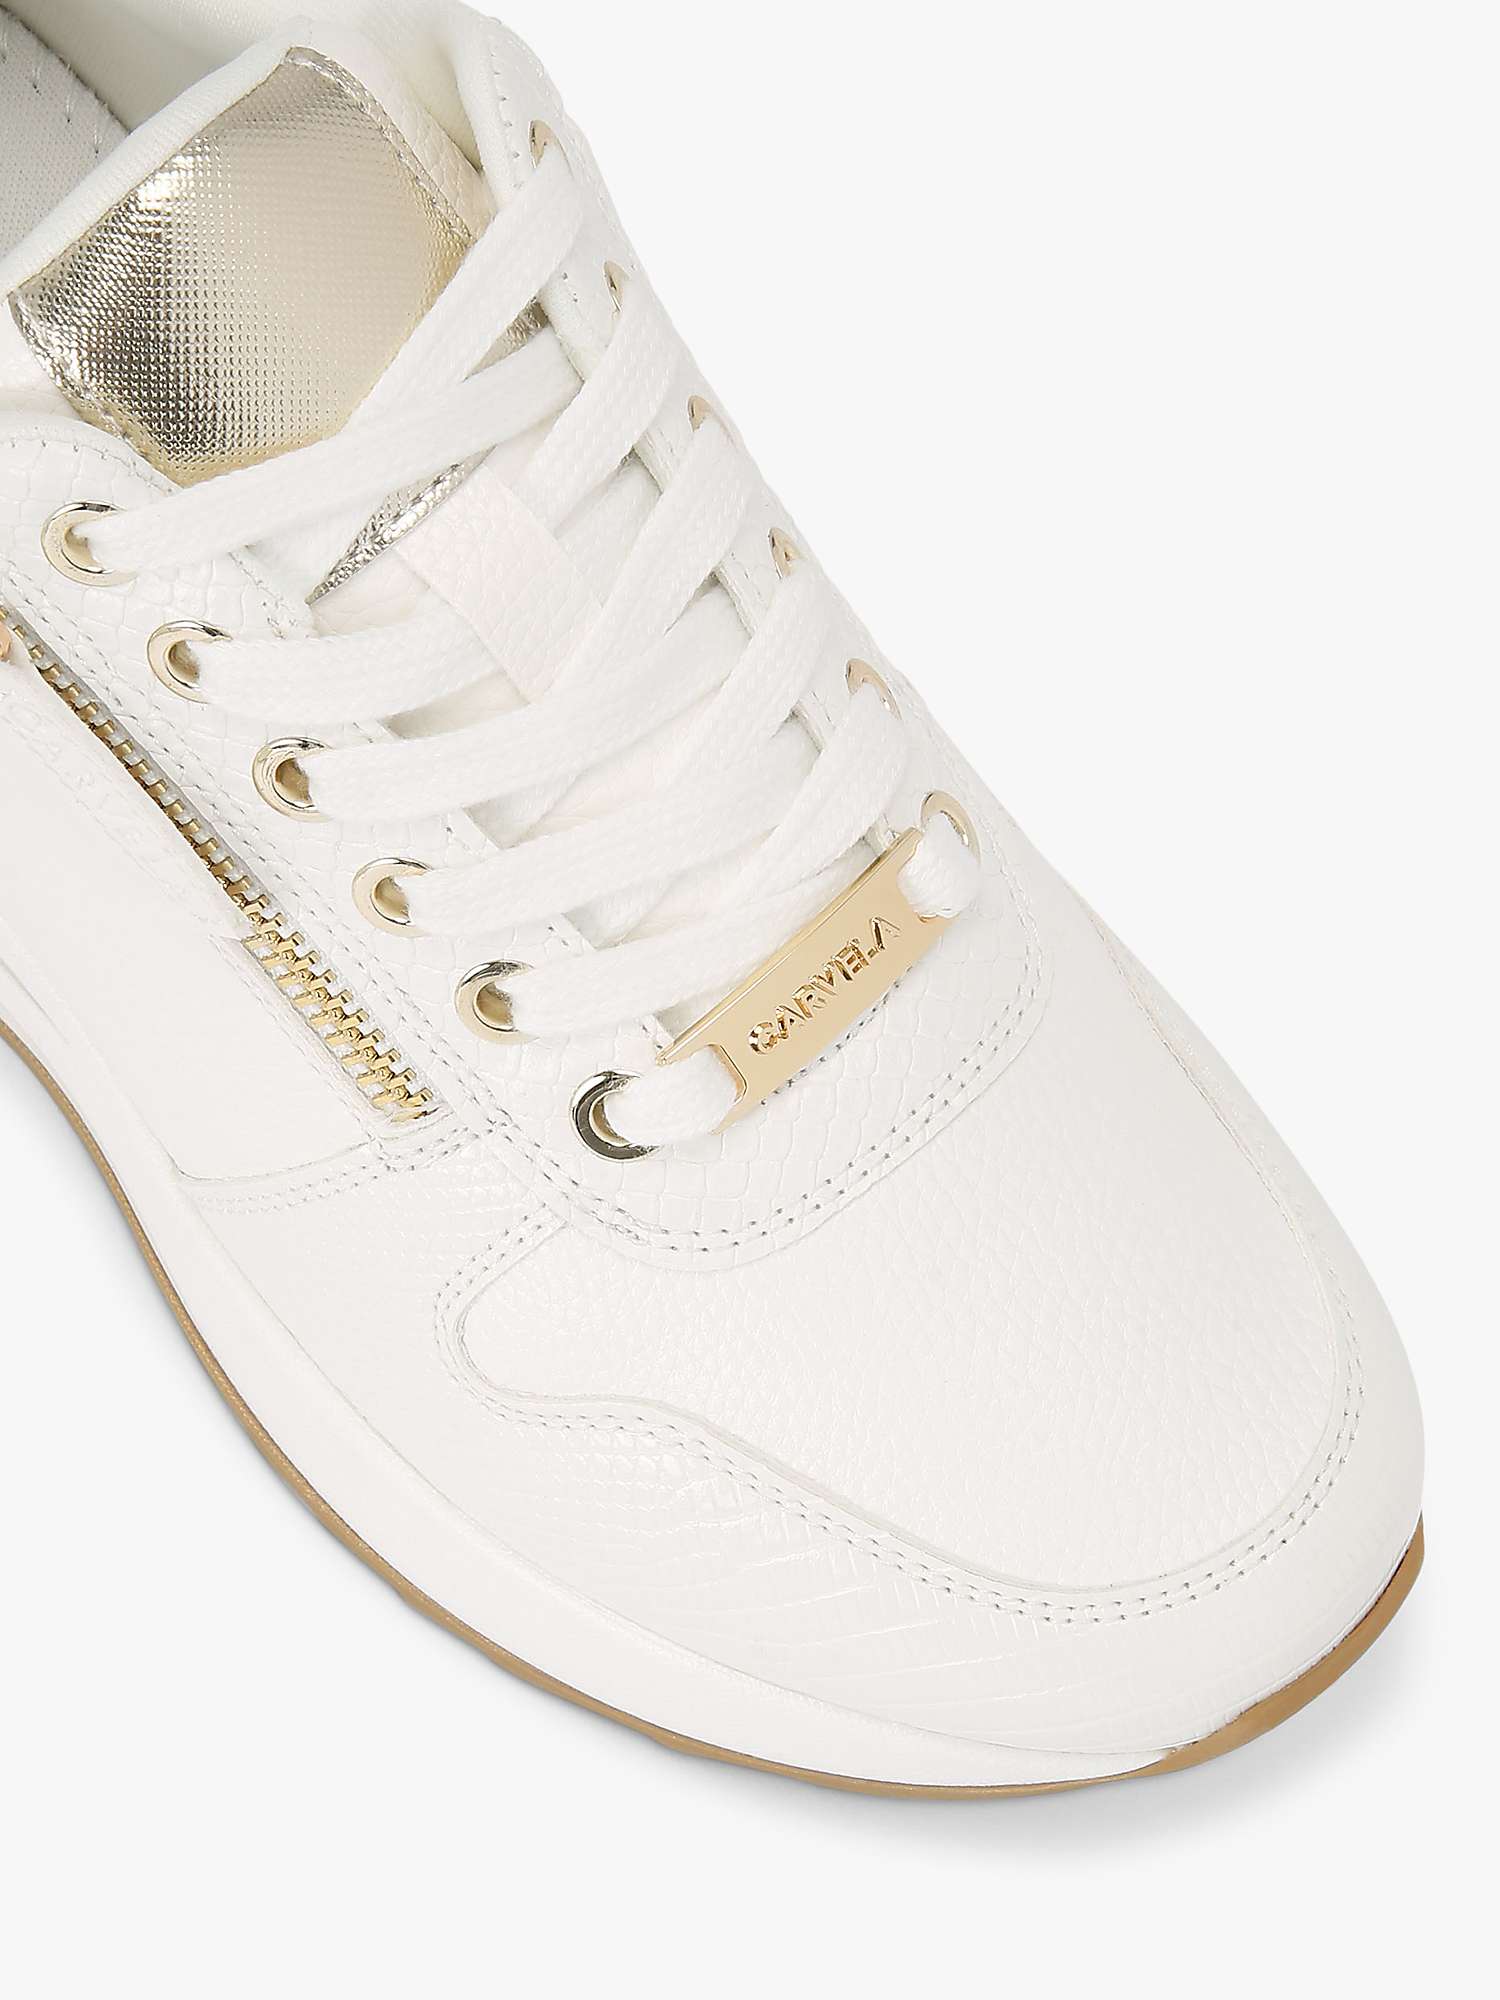 Buy Carvela High Rise Trainers Online at johnlewis.com